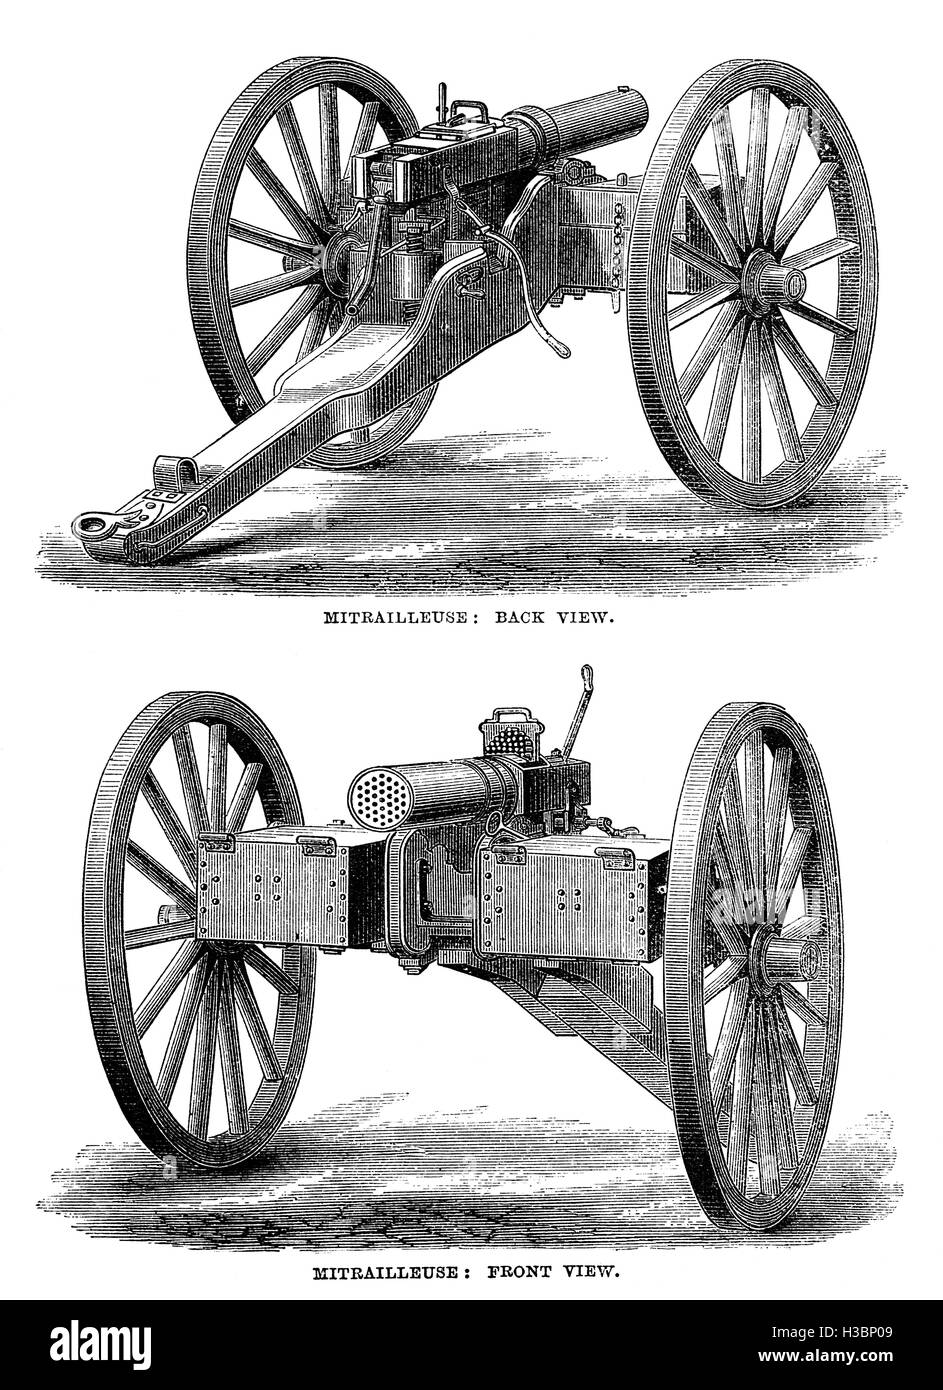 The Montigny mitrailleuse was an early type of crank-operated machine-gun developed by the Belgian gun works of Joseph Montigny between 1859 and 1870. 215  were manufactured for the French Army before the Franco-Prussian War of 1870-71.  When the weapon was engaged at the Battle of Gravelotte in 1871, in an infantry support role and at shorter distances, it produced devastating effects. Stock Photo